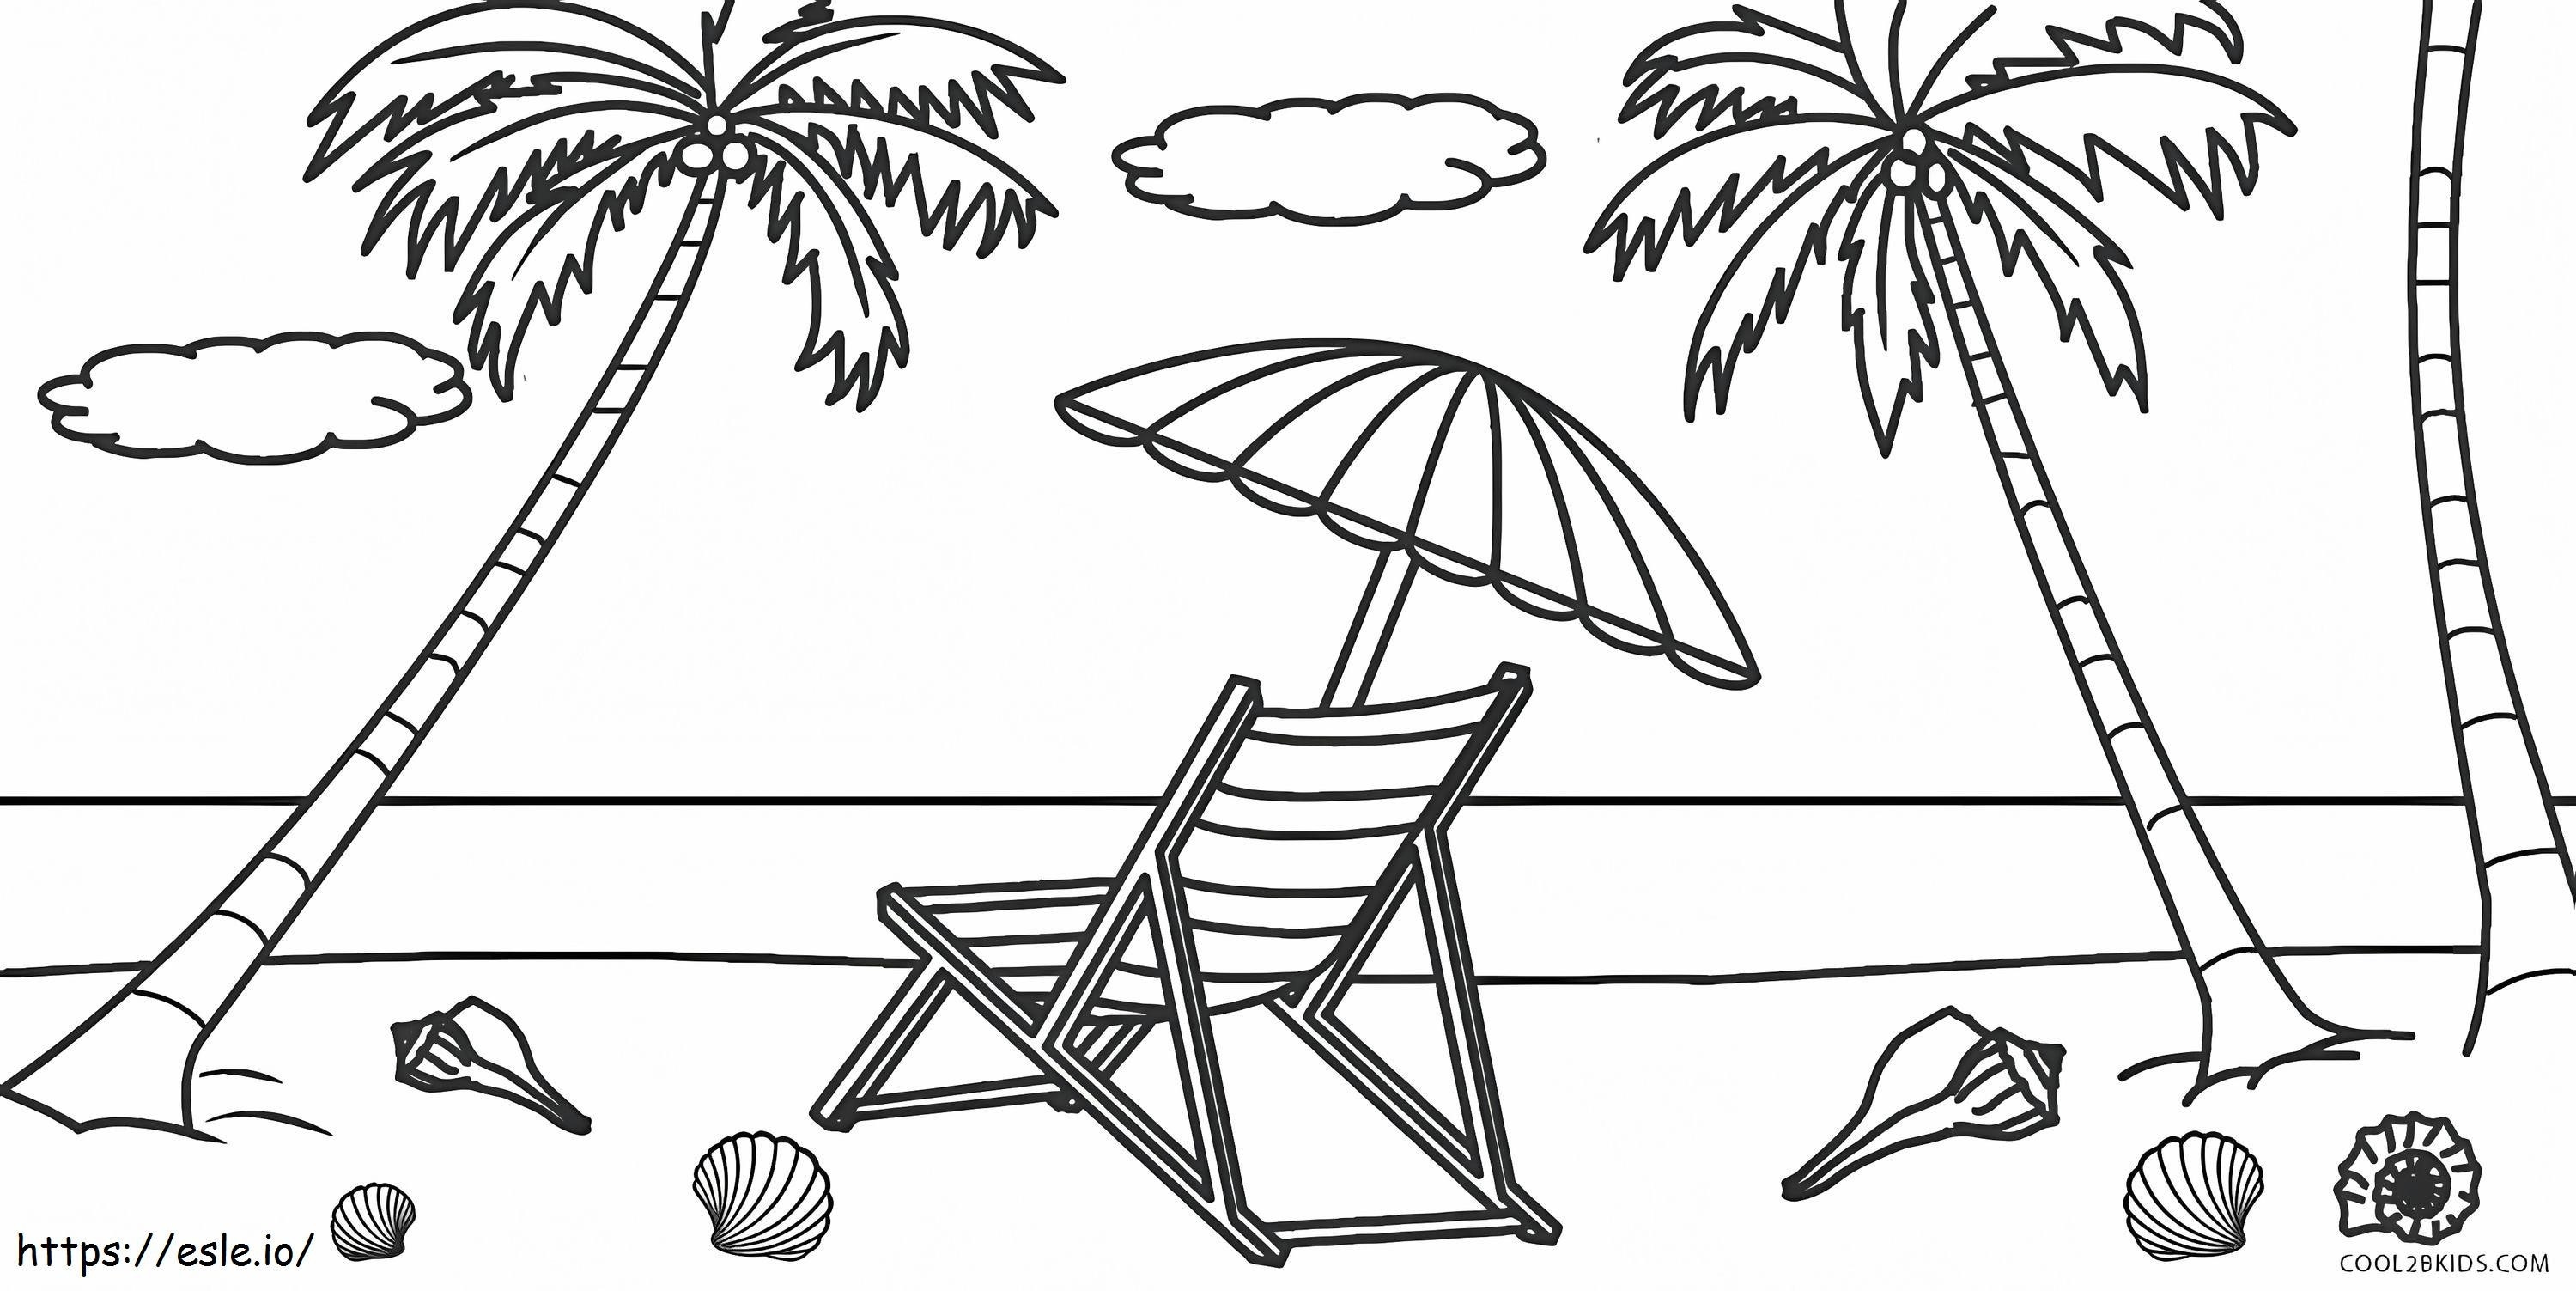 Chair And Umbrella On The Beach coloring page